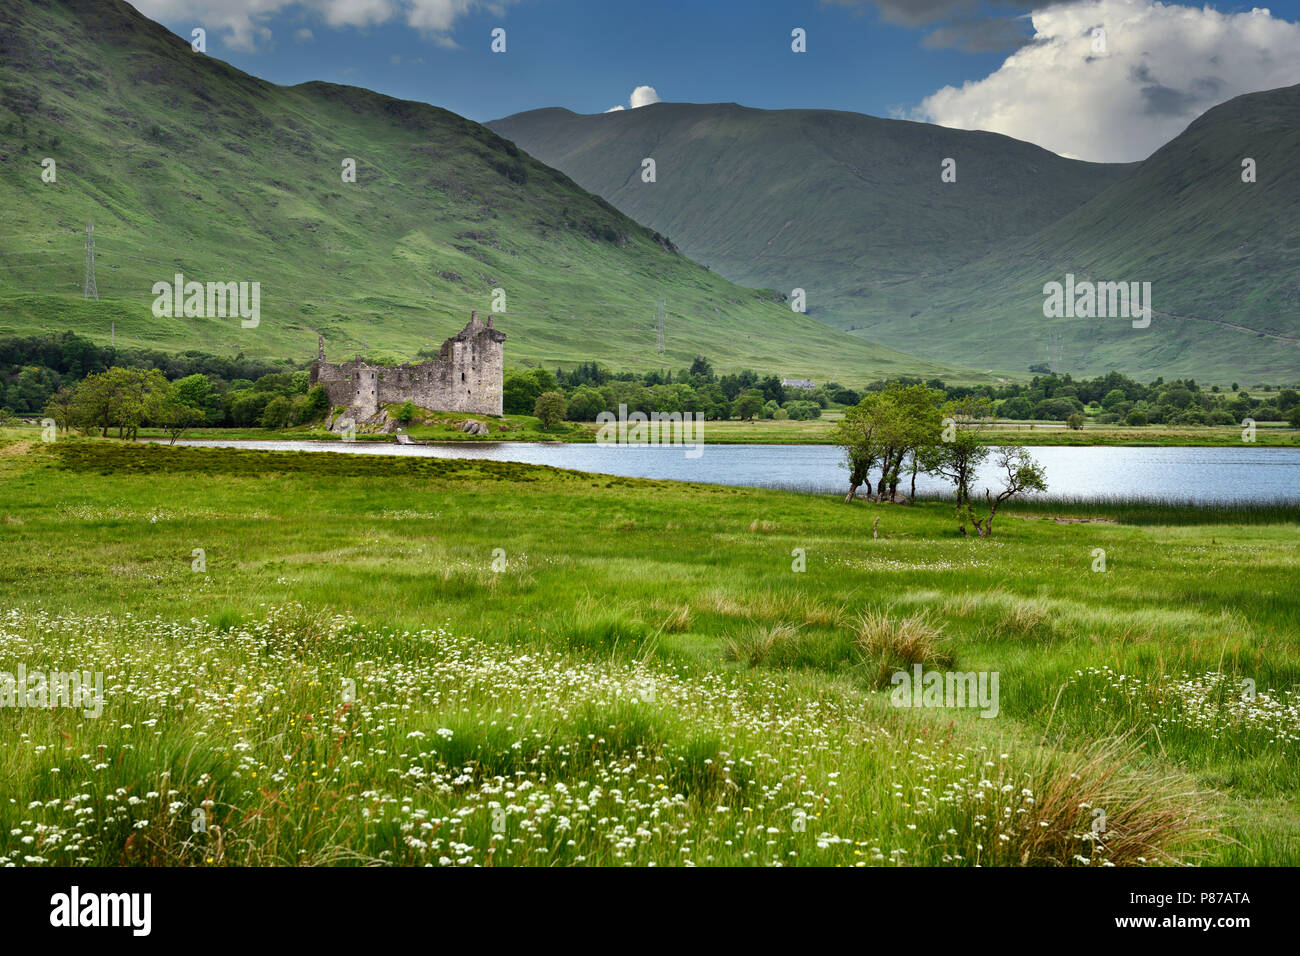 Ruins of the 15th Century Kilchurn Castle in the Scottish Highlands on Loch Awe Dalmally Scotland UK Stock Photo